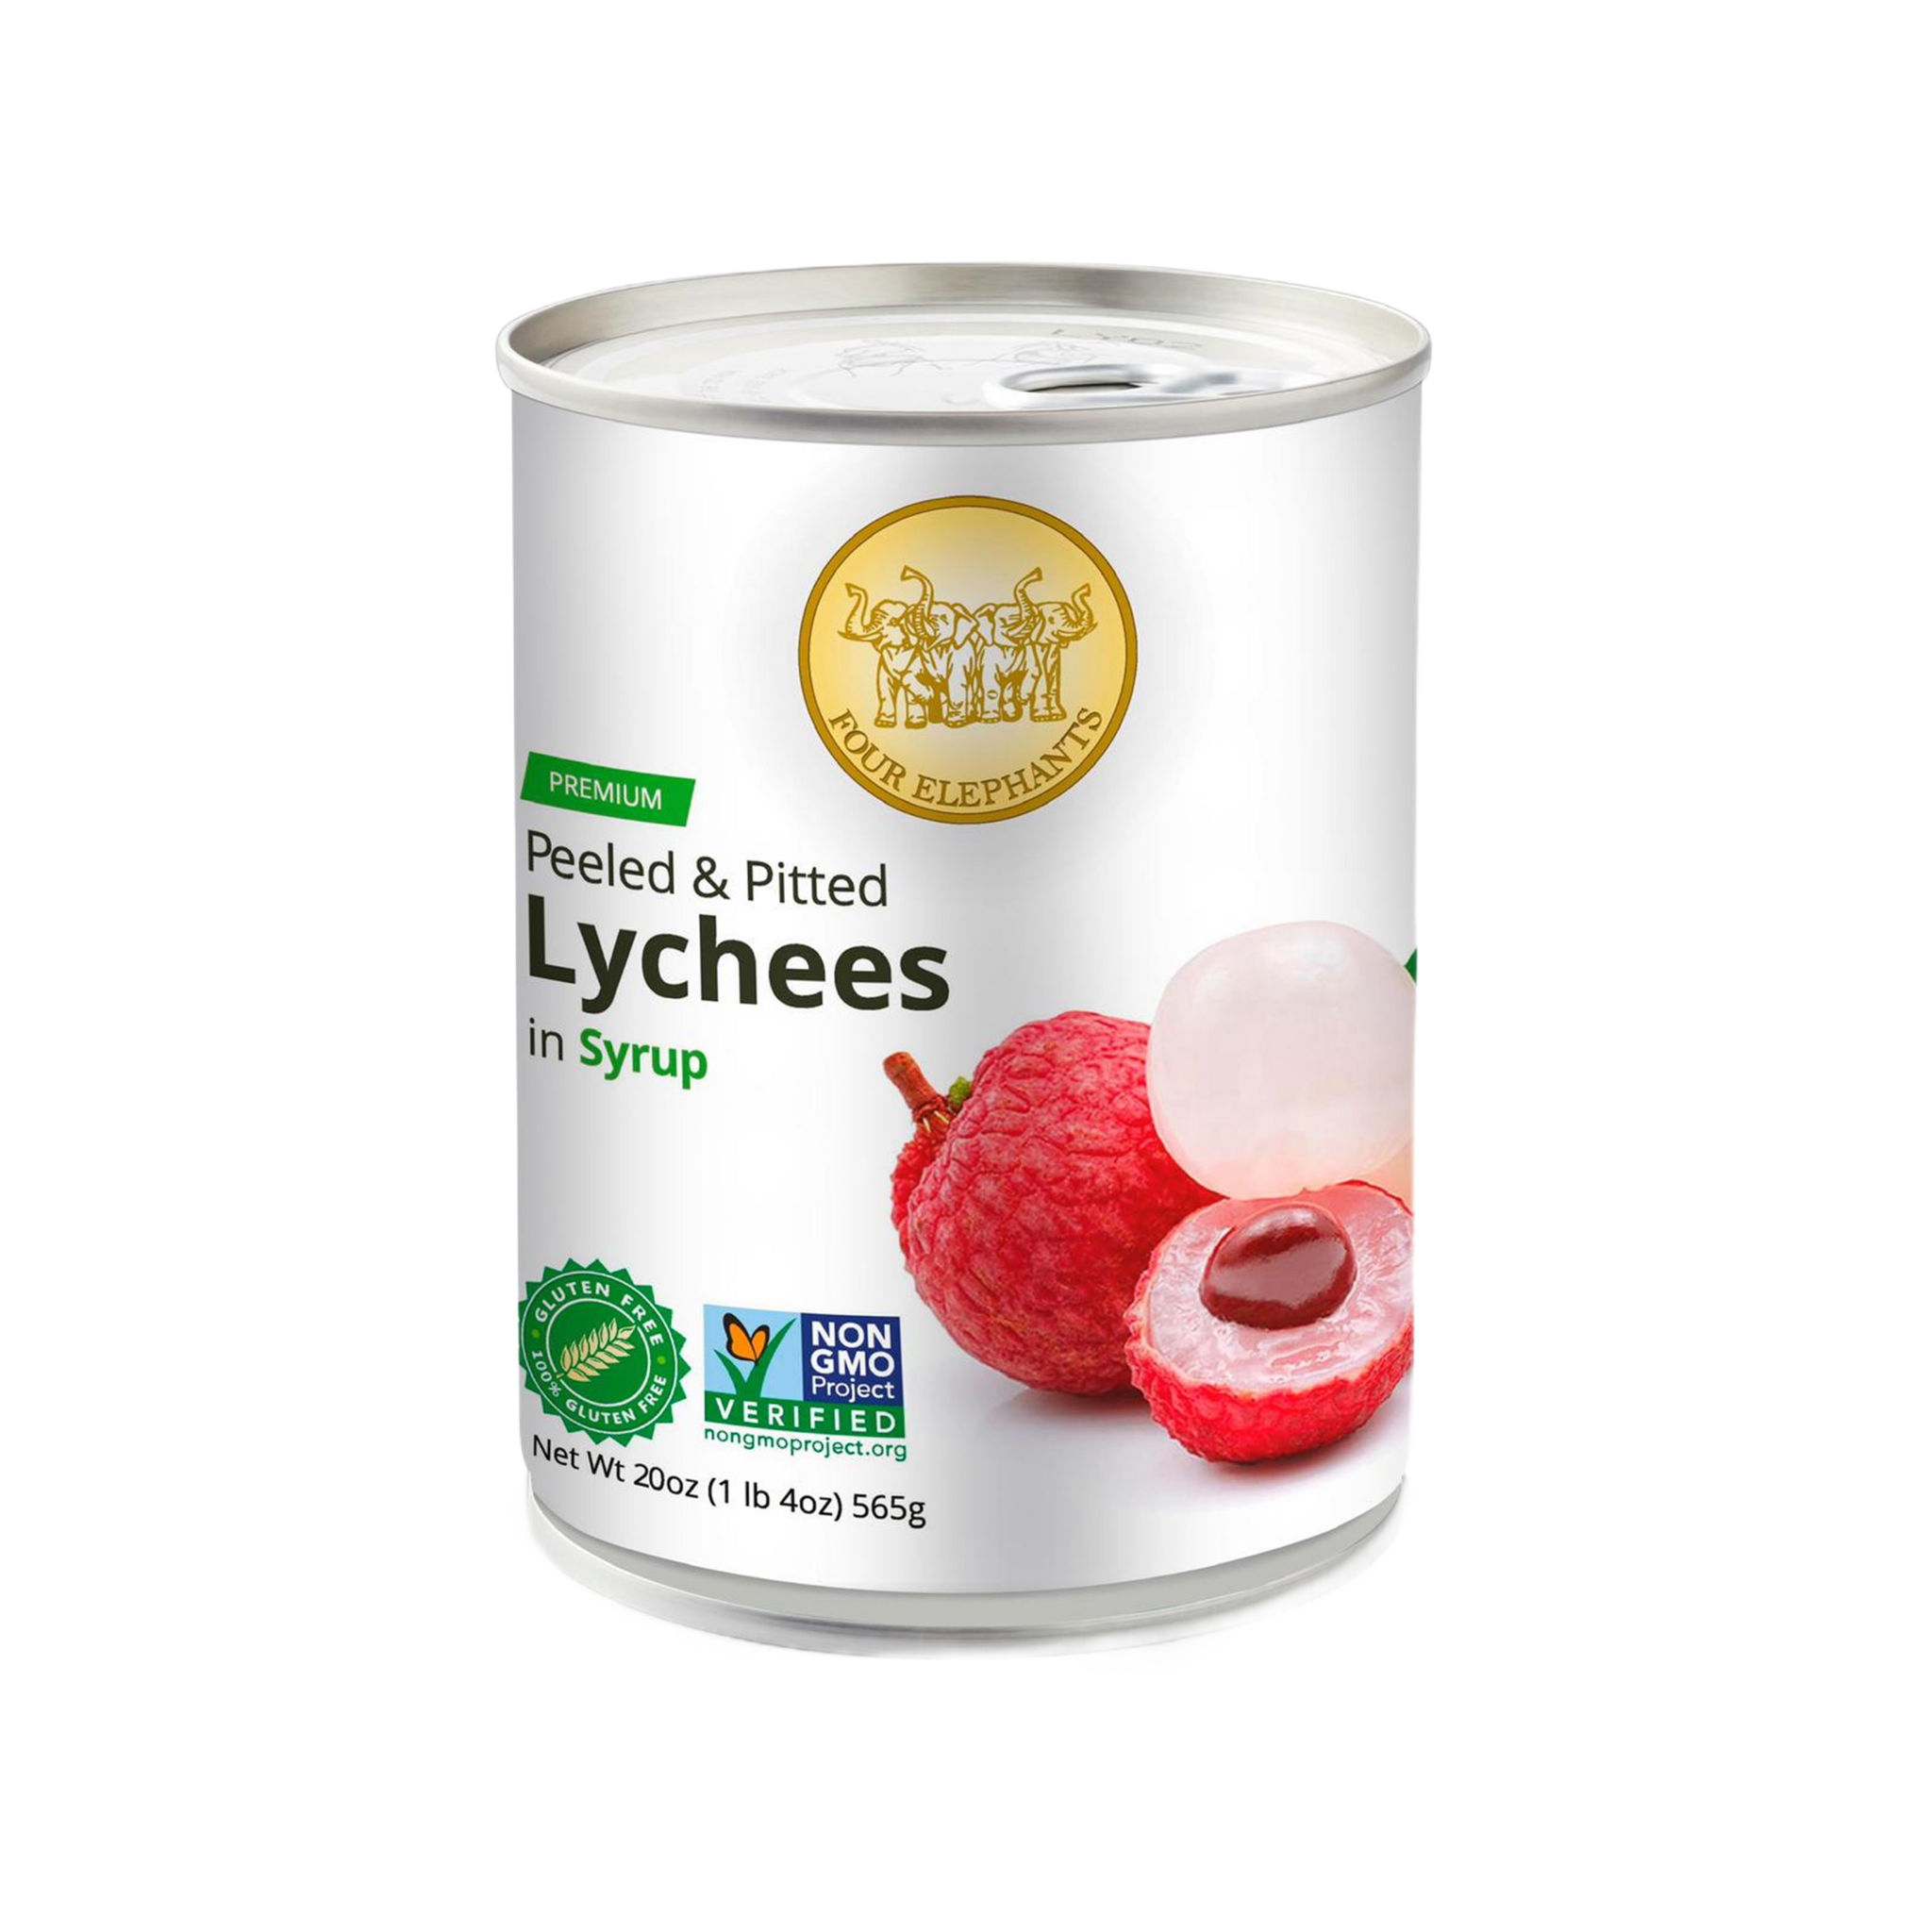 Premium Lychee in Syrup